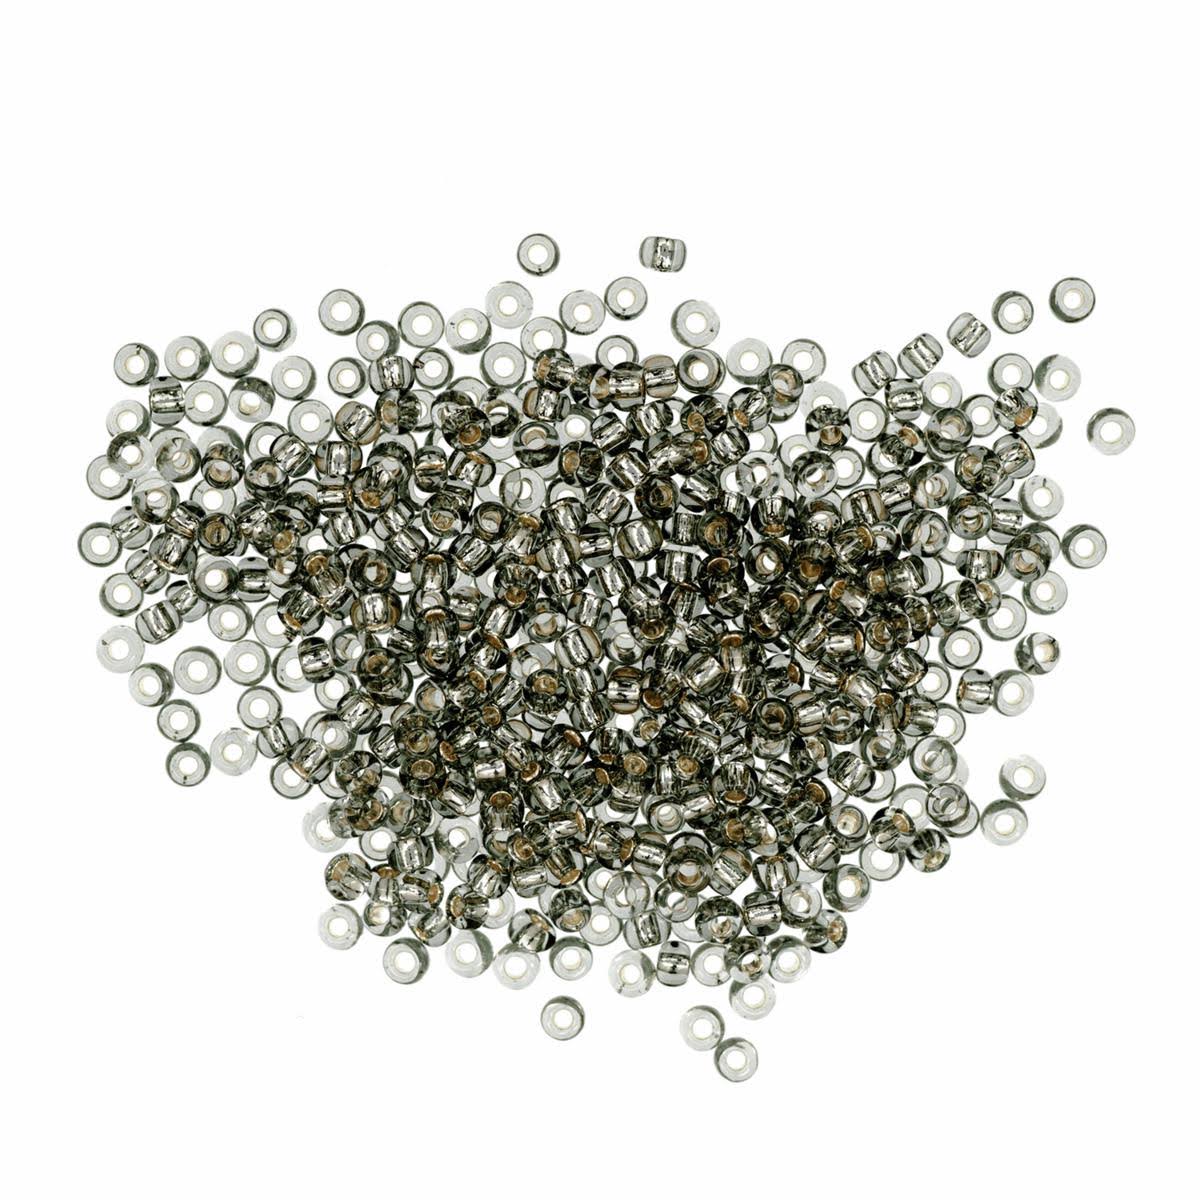 Mill Hill Silver Seed Beads Size 11